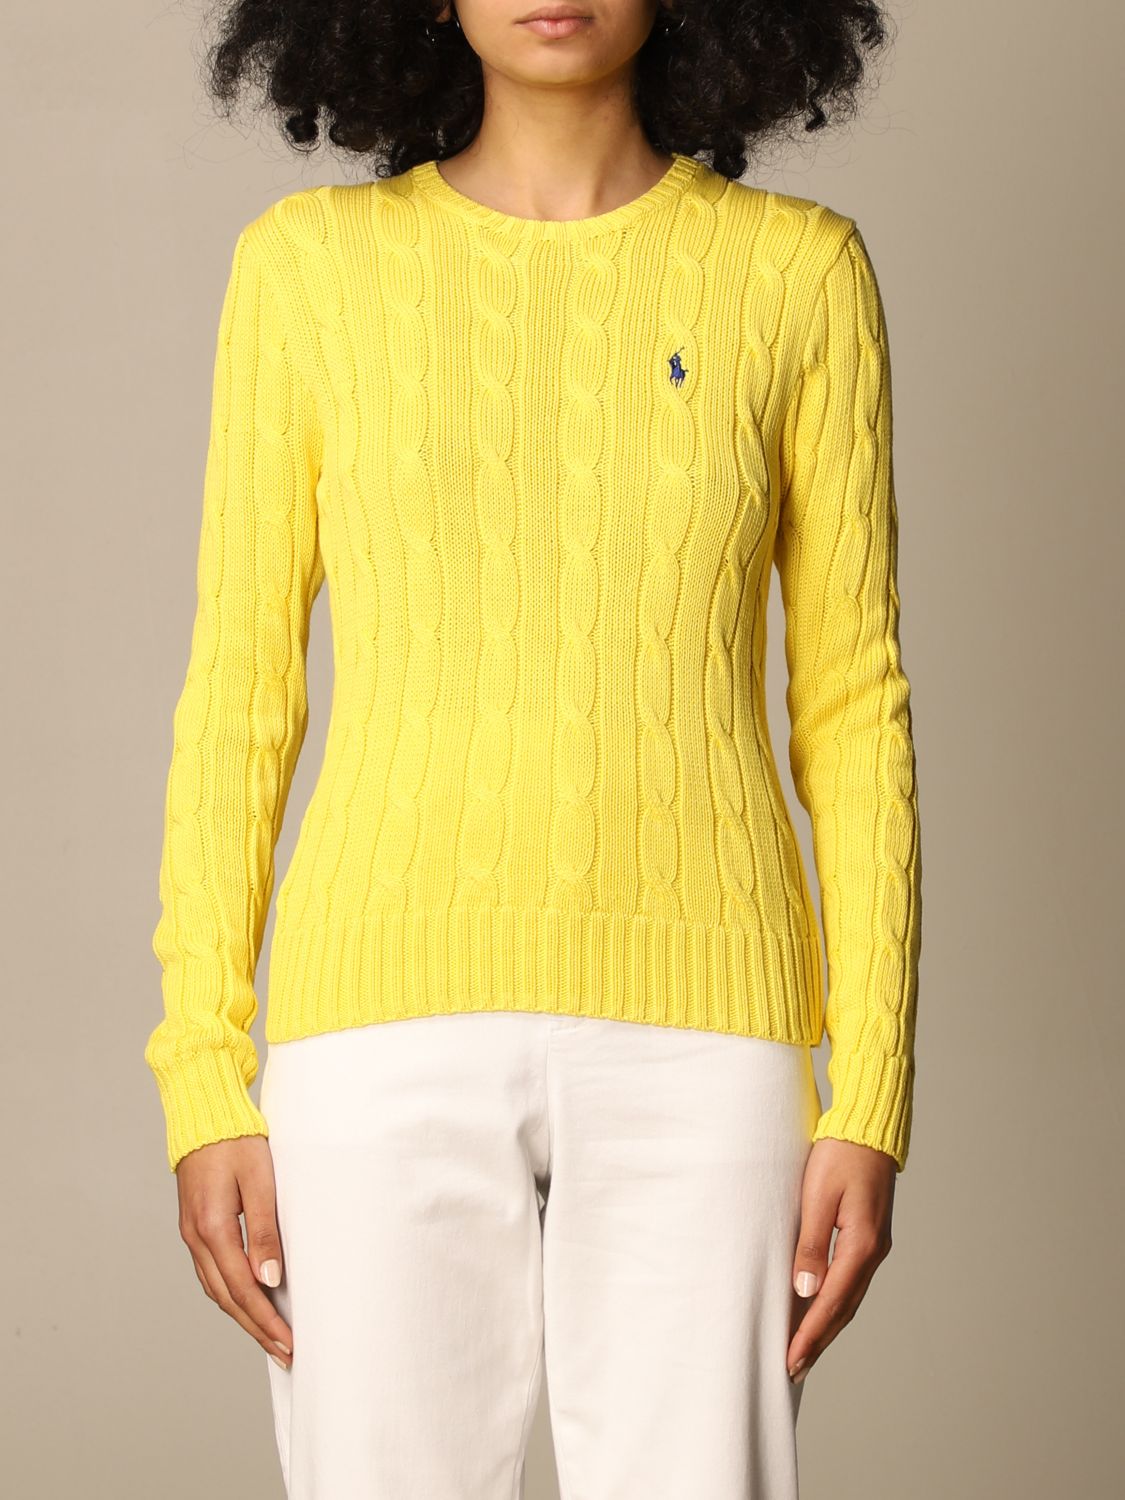 Polo Ralph Lauren Outlet: crewneck sweater in cable knit - Yellow | Polo  Ralph Lauren sweater 211580009 online on 